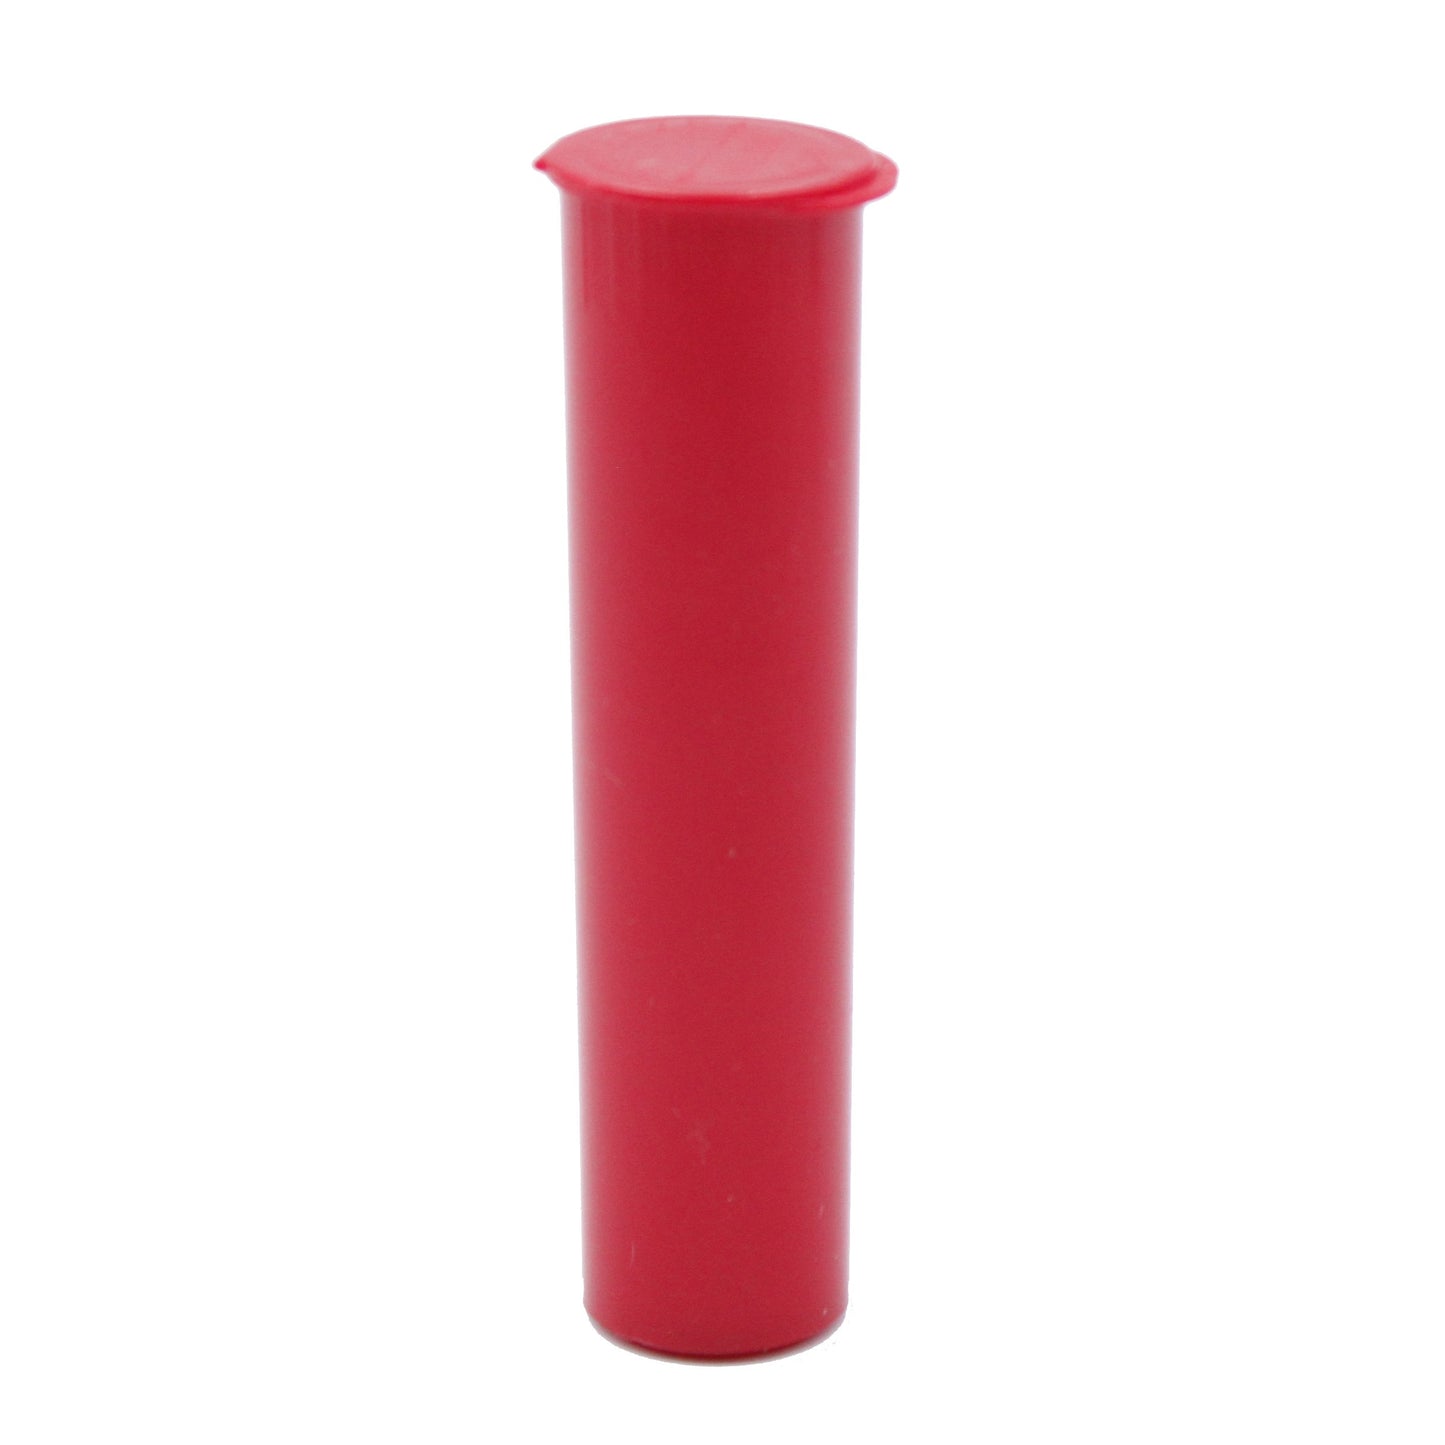 Squeeze Top Child-Resistant 78mm J-Tube Red